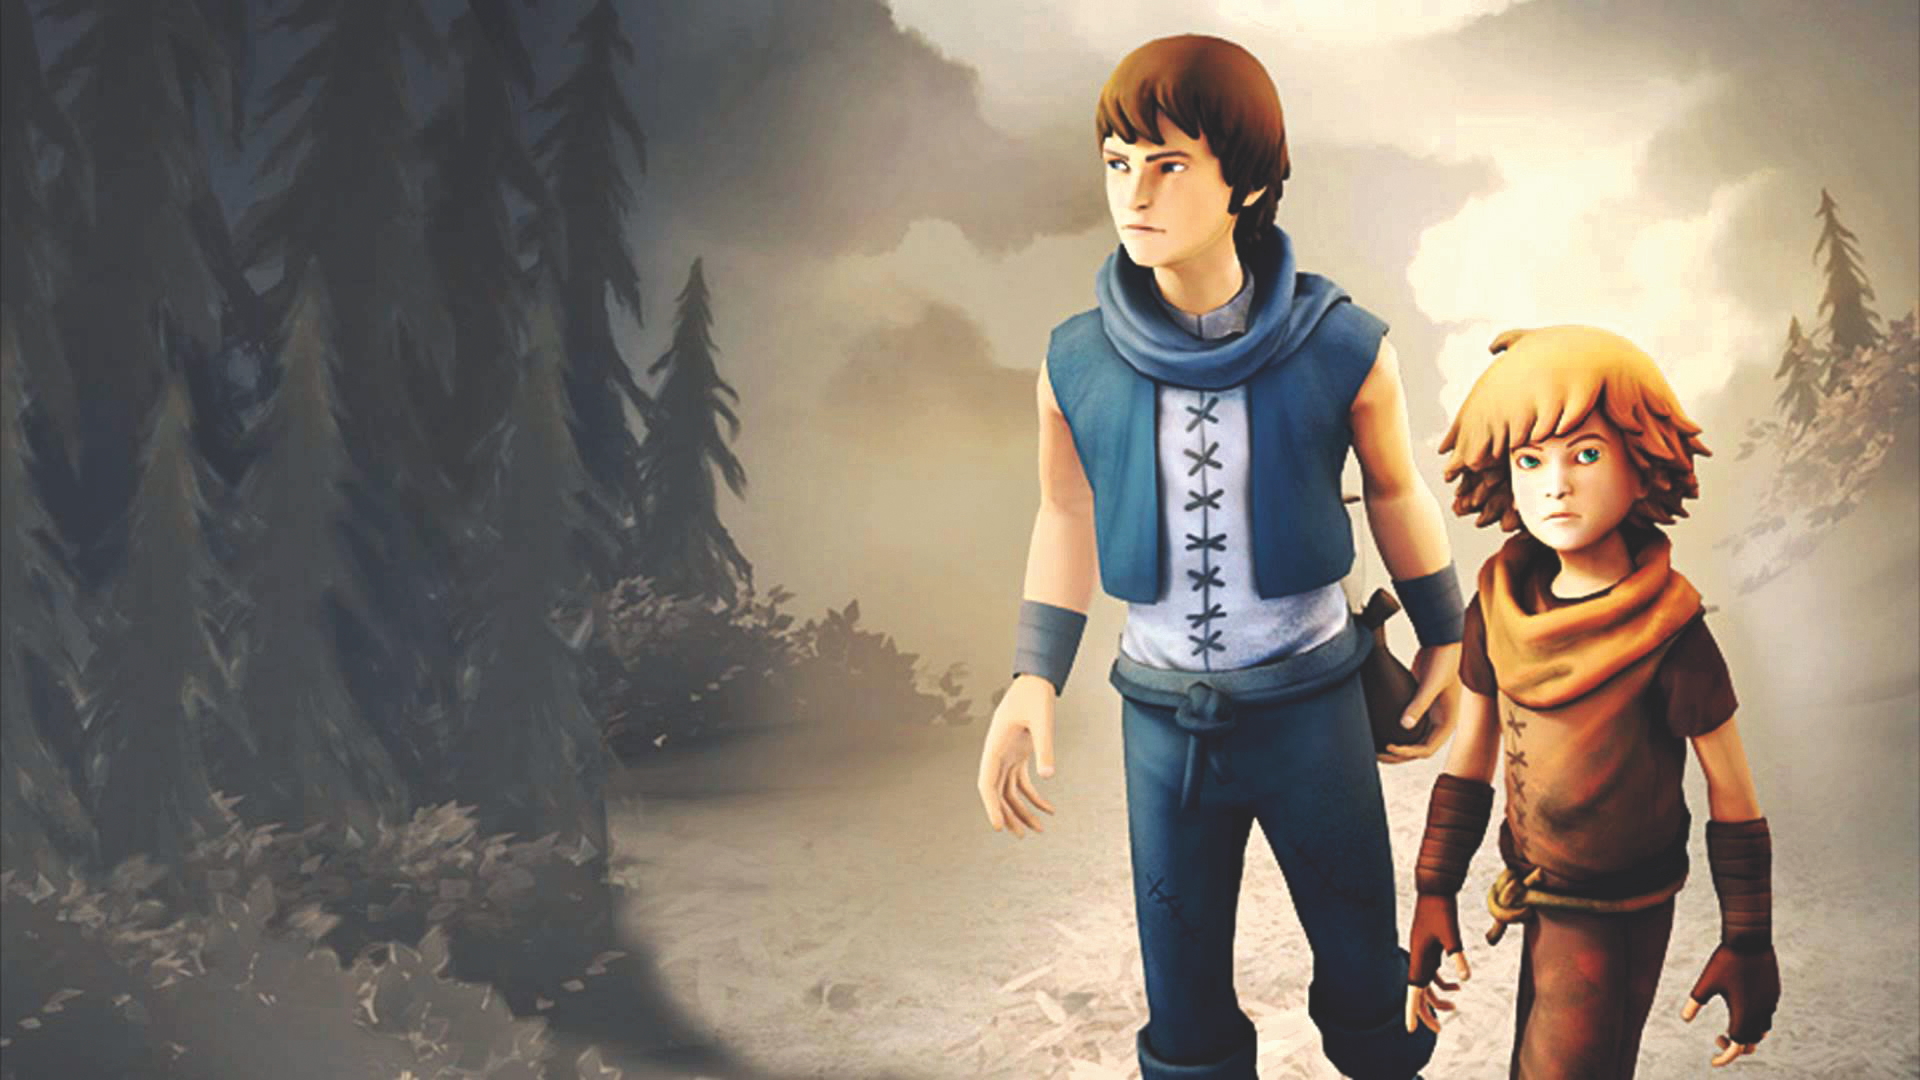 The two brothers in the co-op game Brothers: A Tale of Two Sons